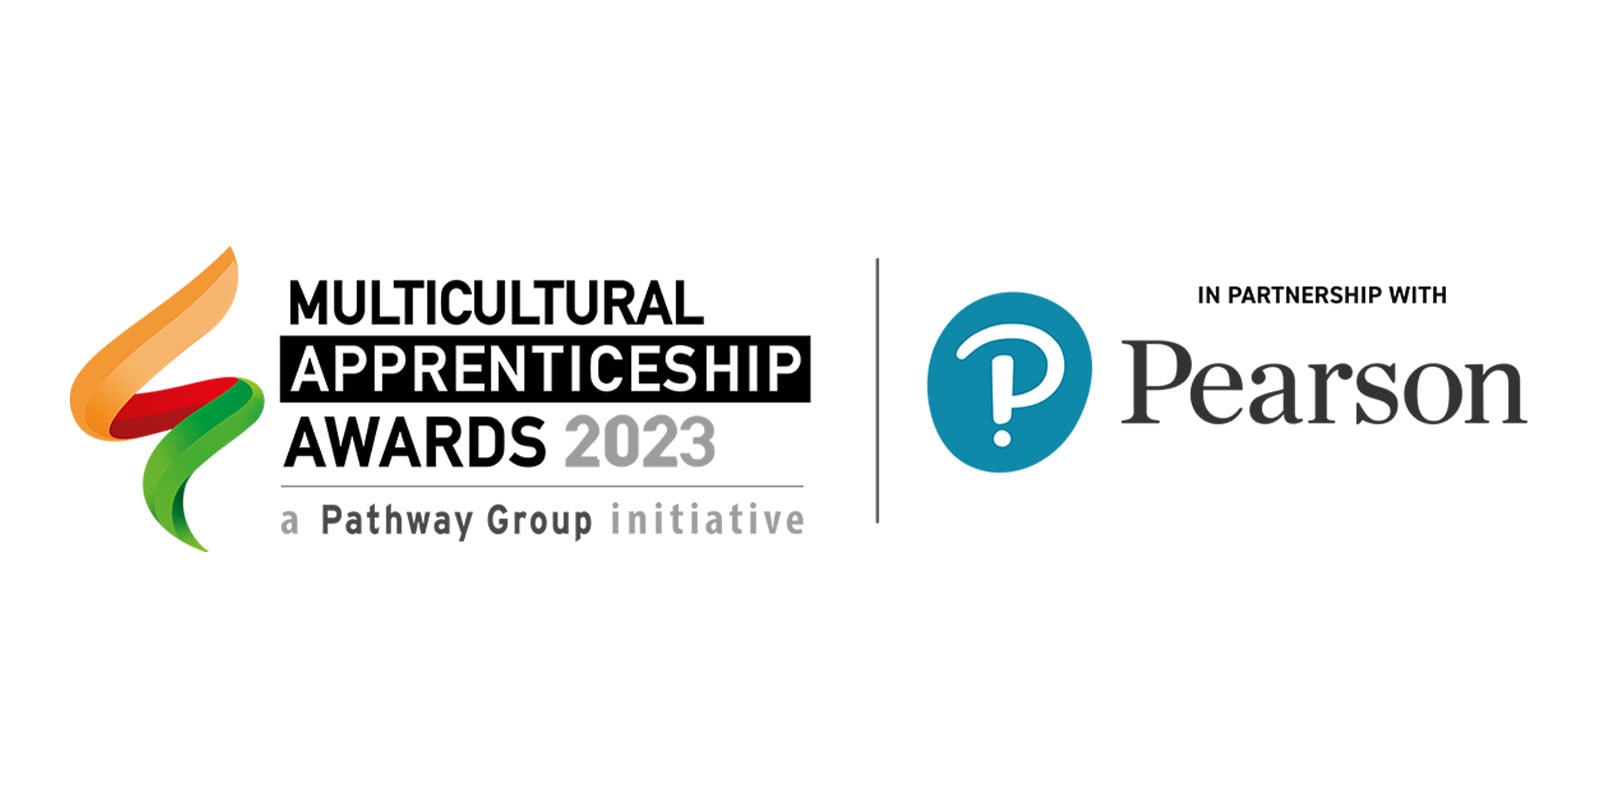 Multicultural Apprenticeship Awards 2023 a Pathway Group initiative in partnership with Pearson